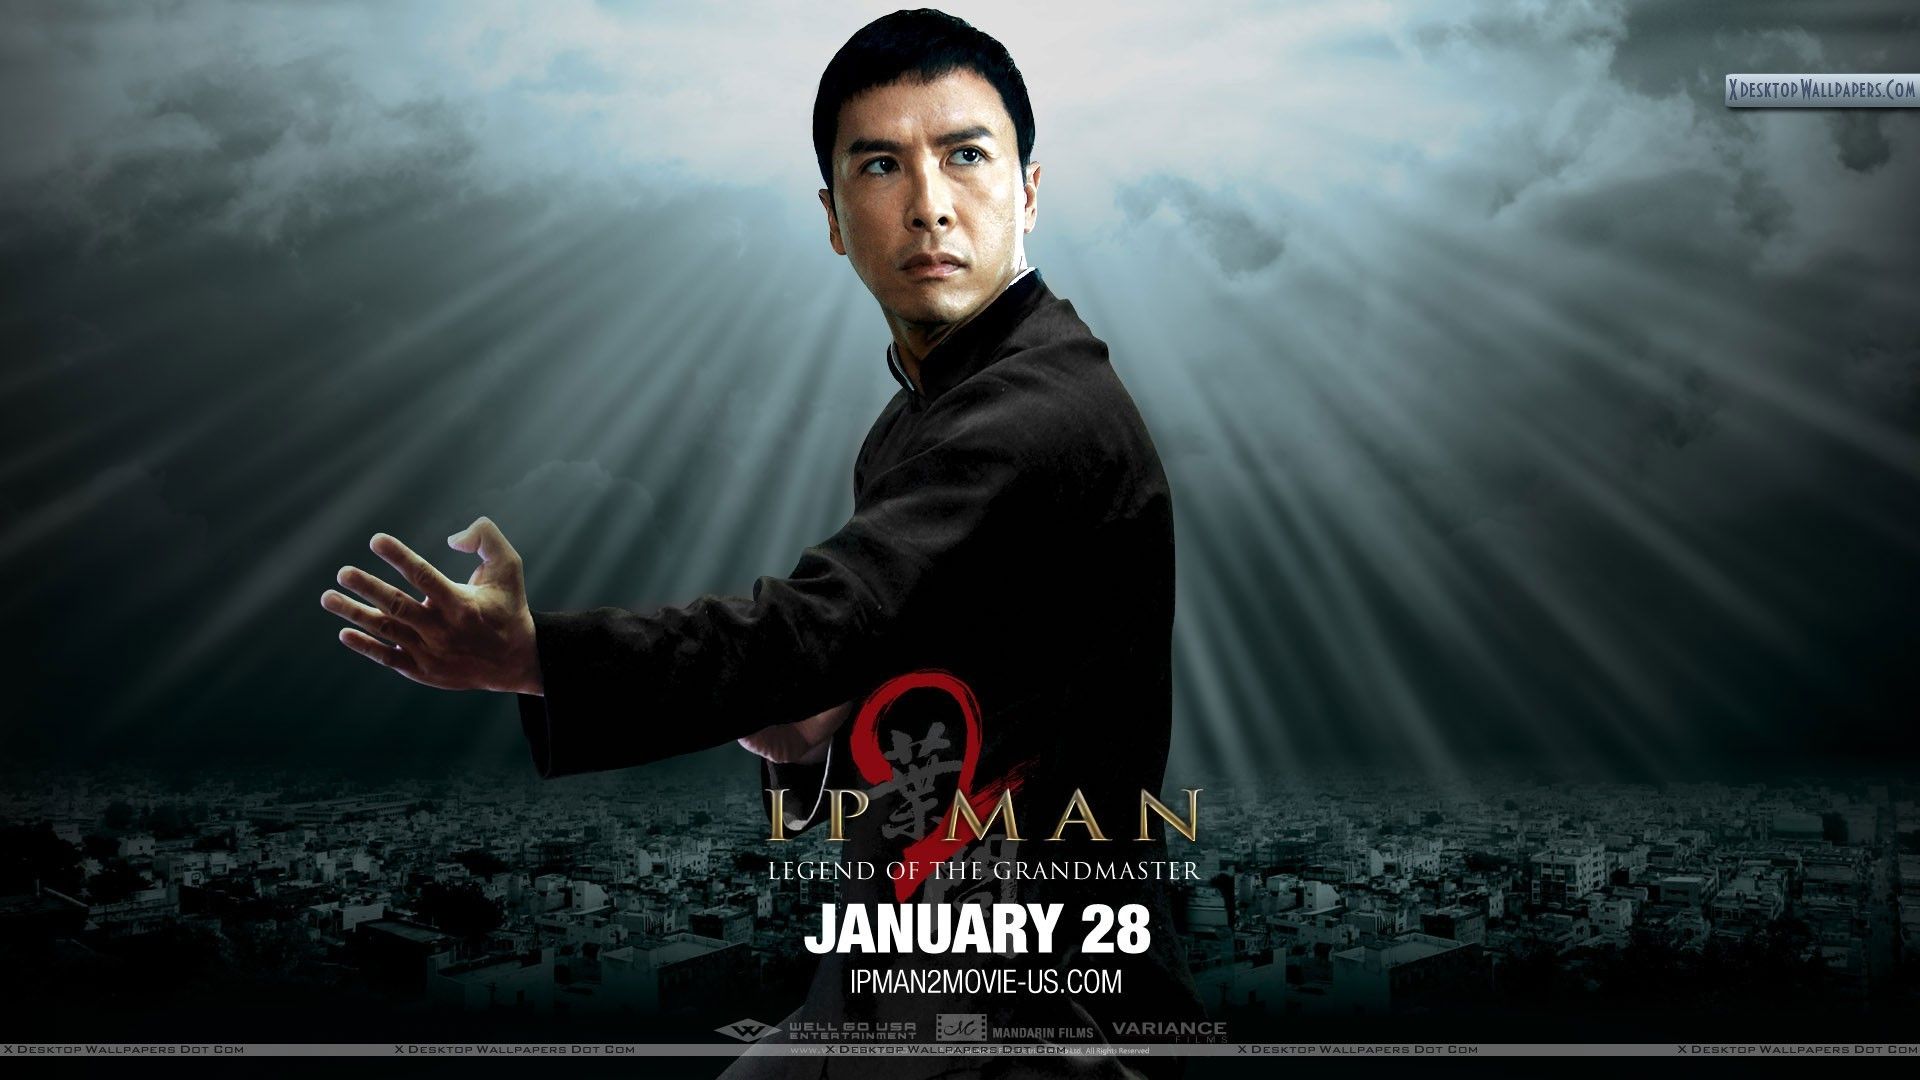 IP Man 2 Wallpapers, Photos & Images in HD